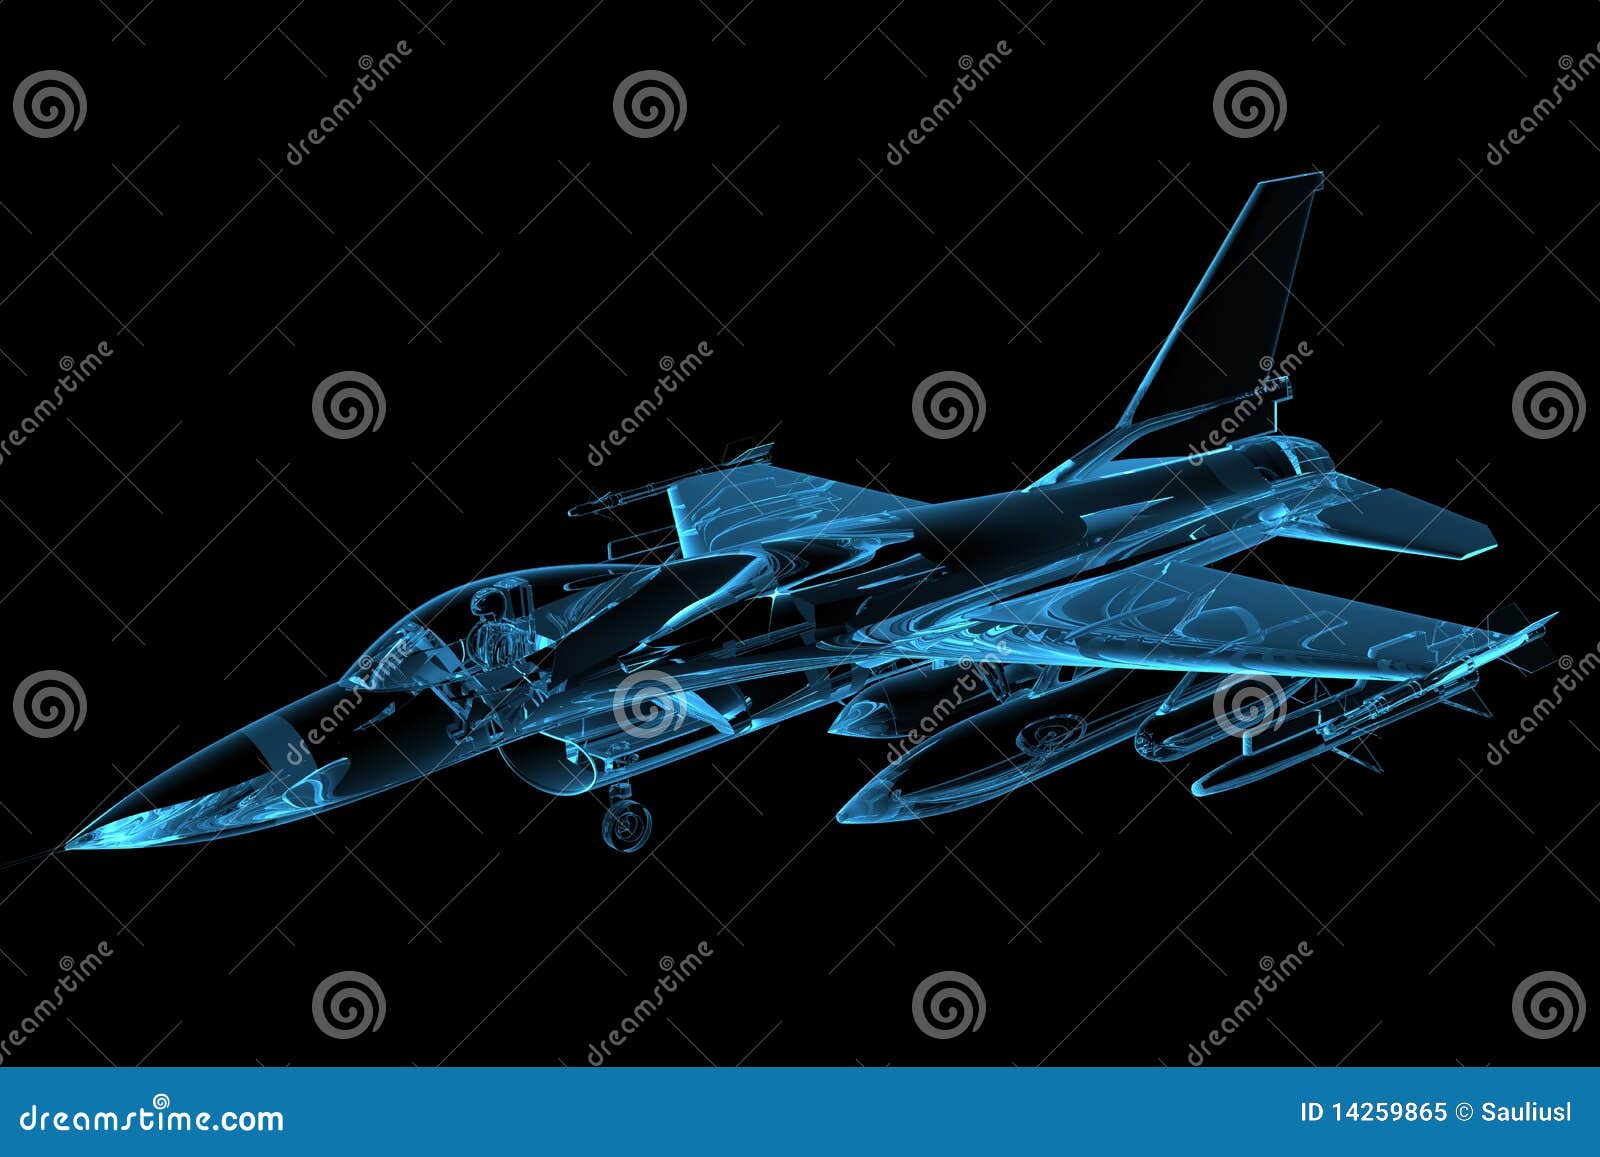 rendered blue xray transparent f16 falcon